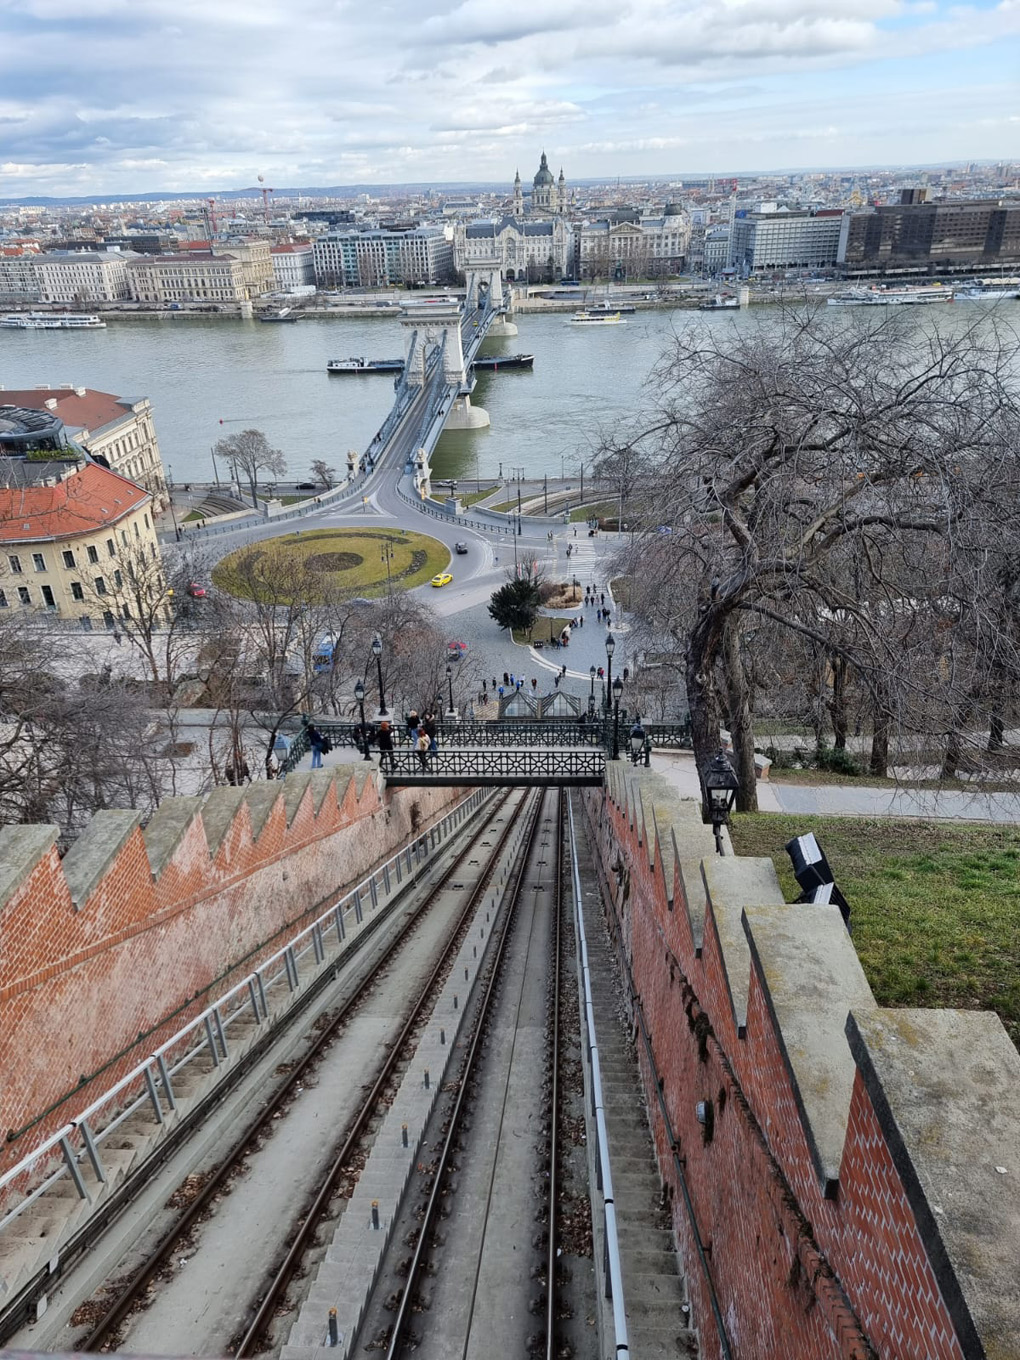 Cable railway ascending hill in Budapest.